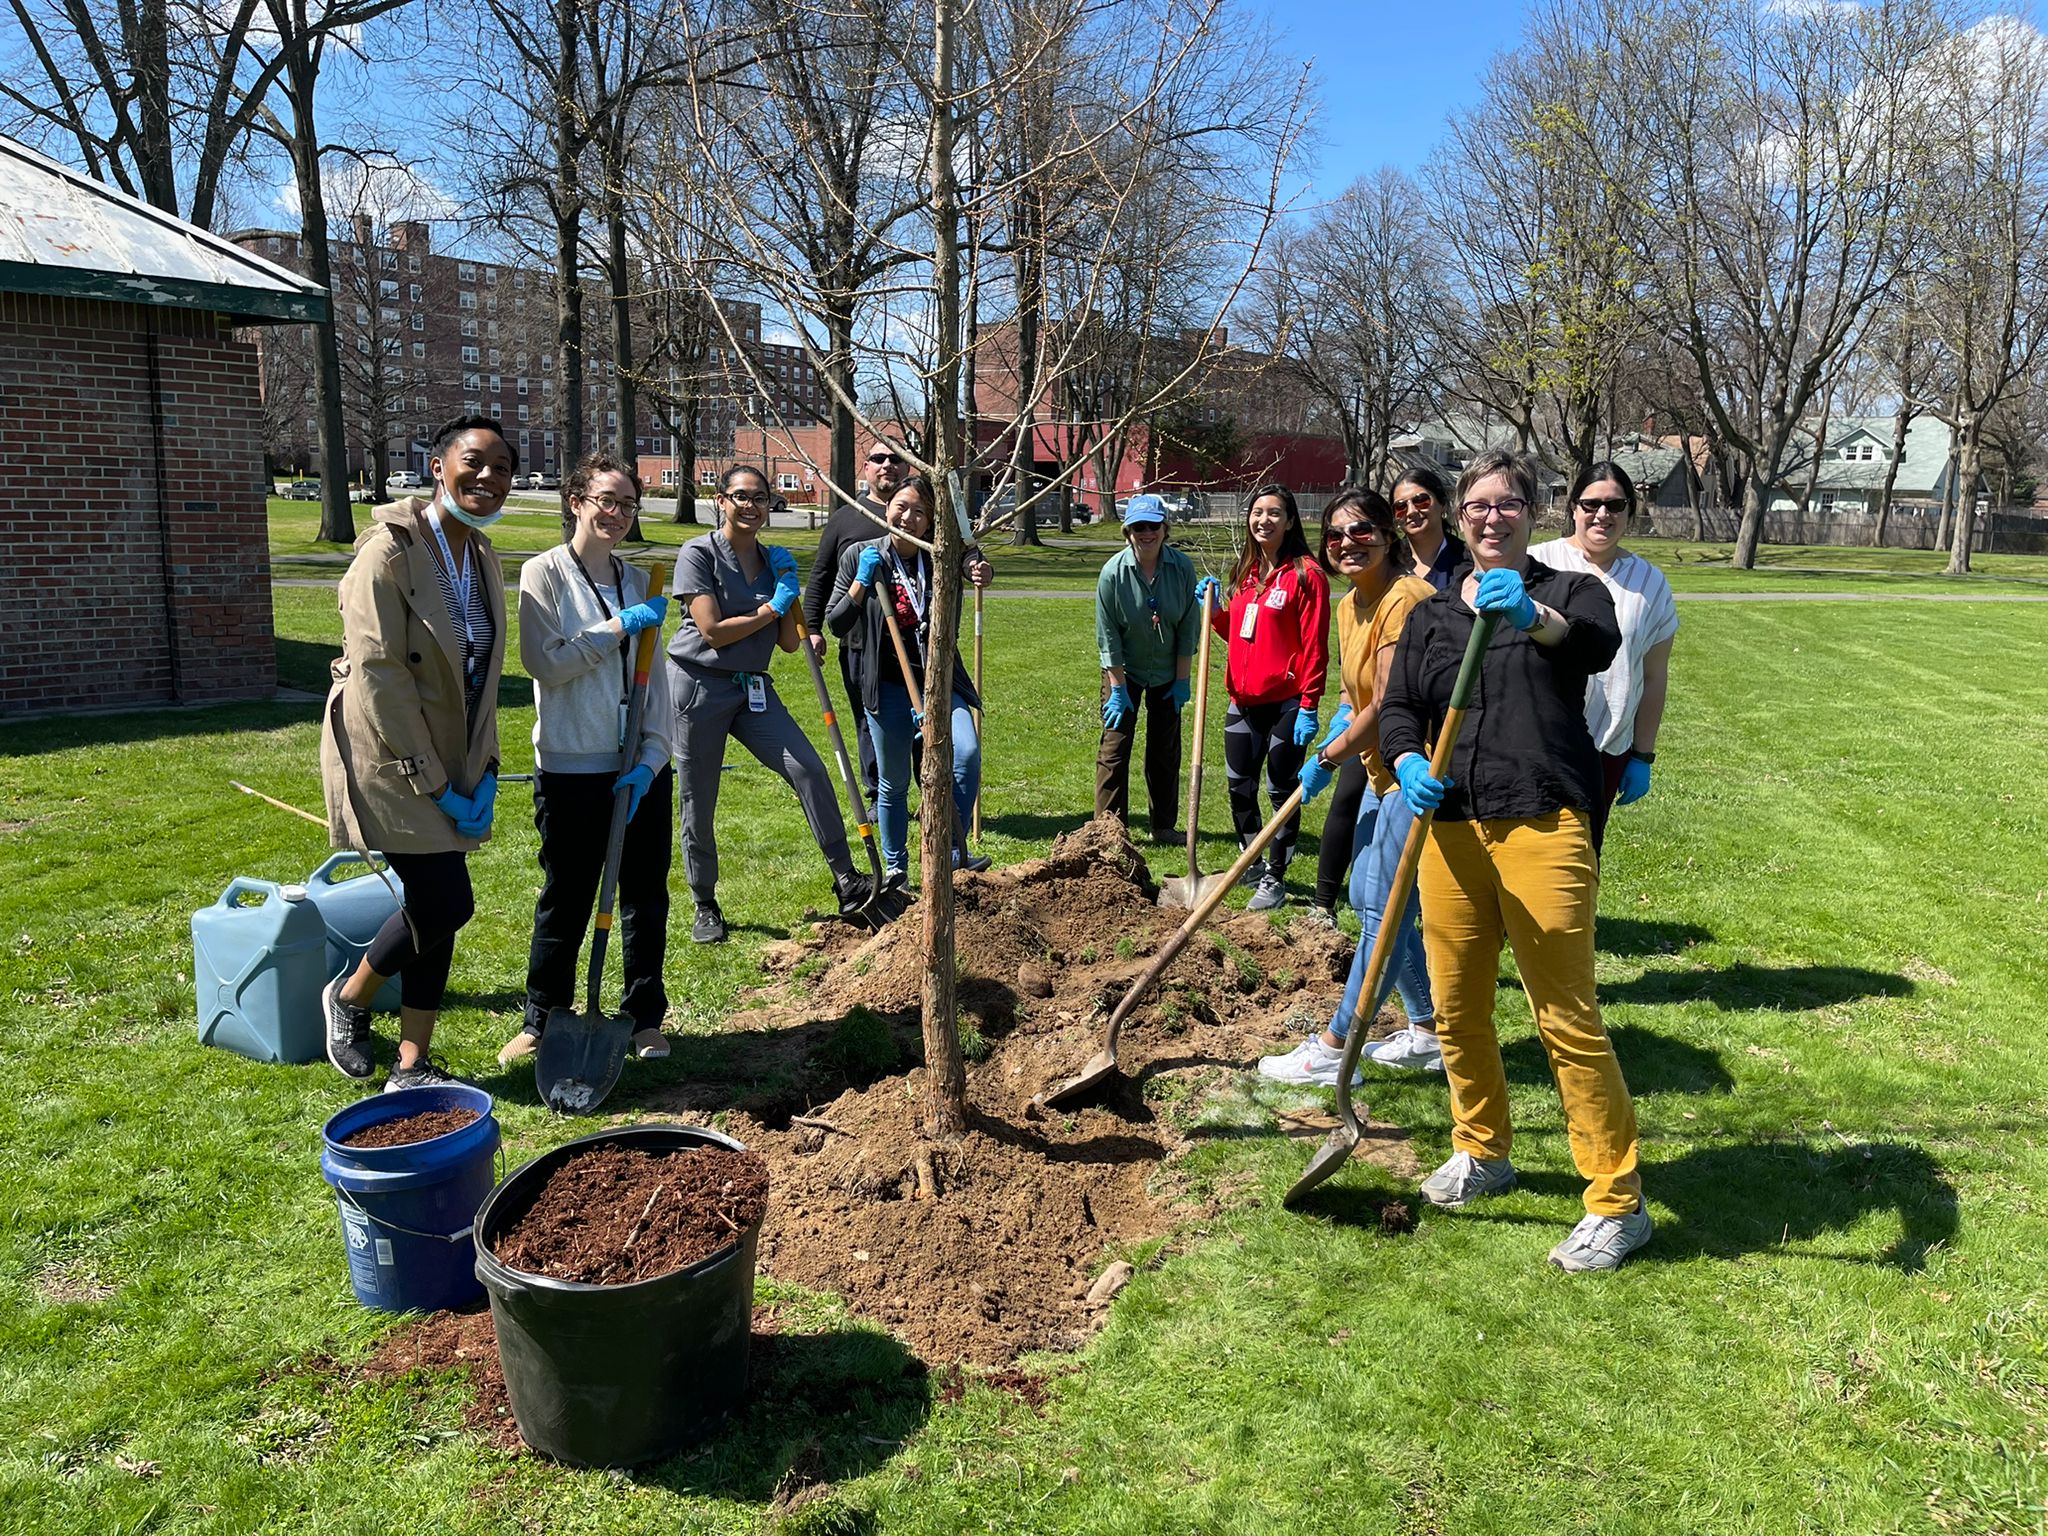 Group photo of Internal Medicine Residents grouped around a just-planted tree